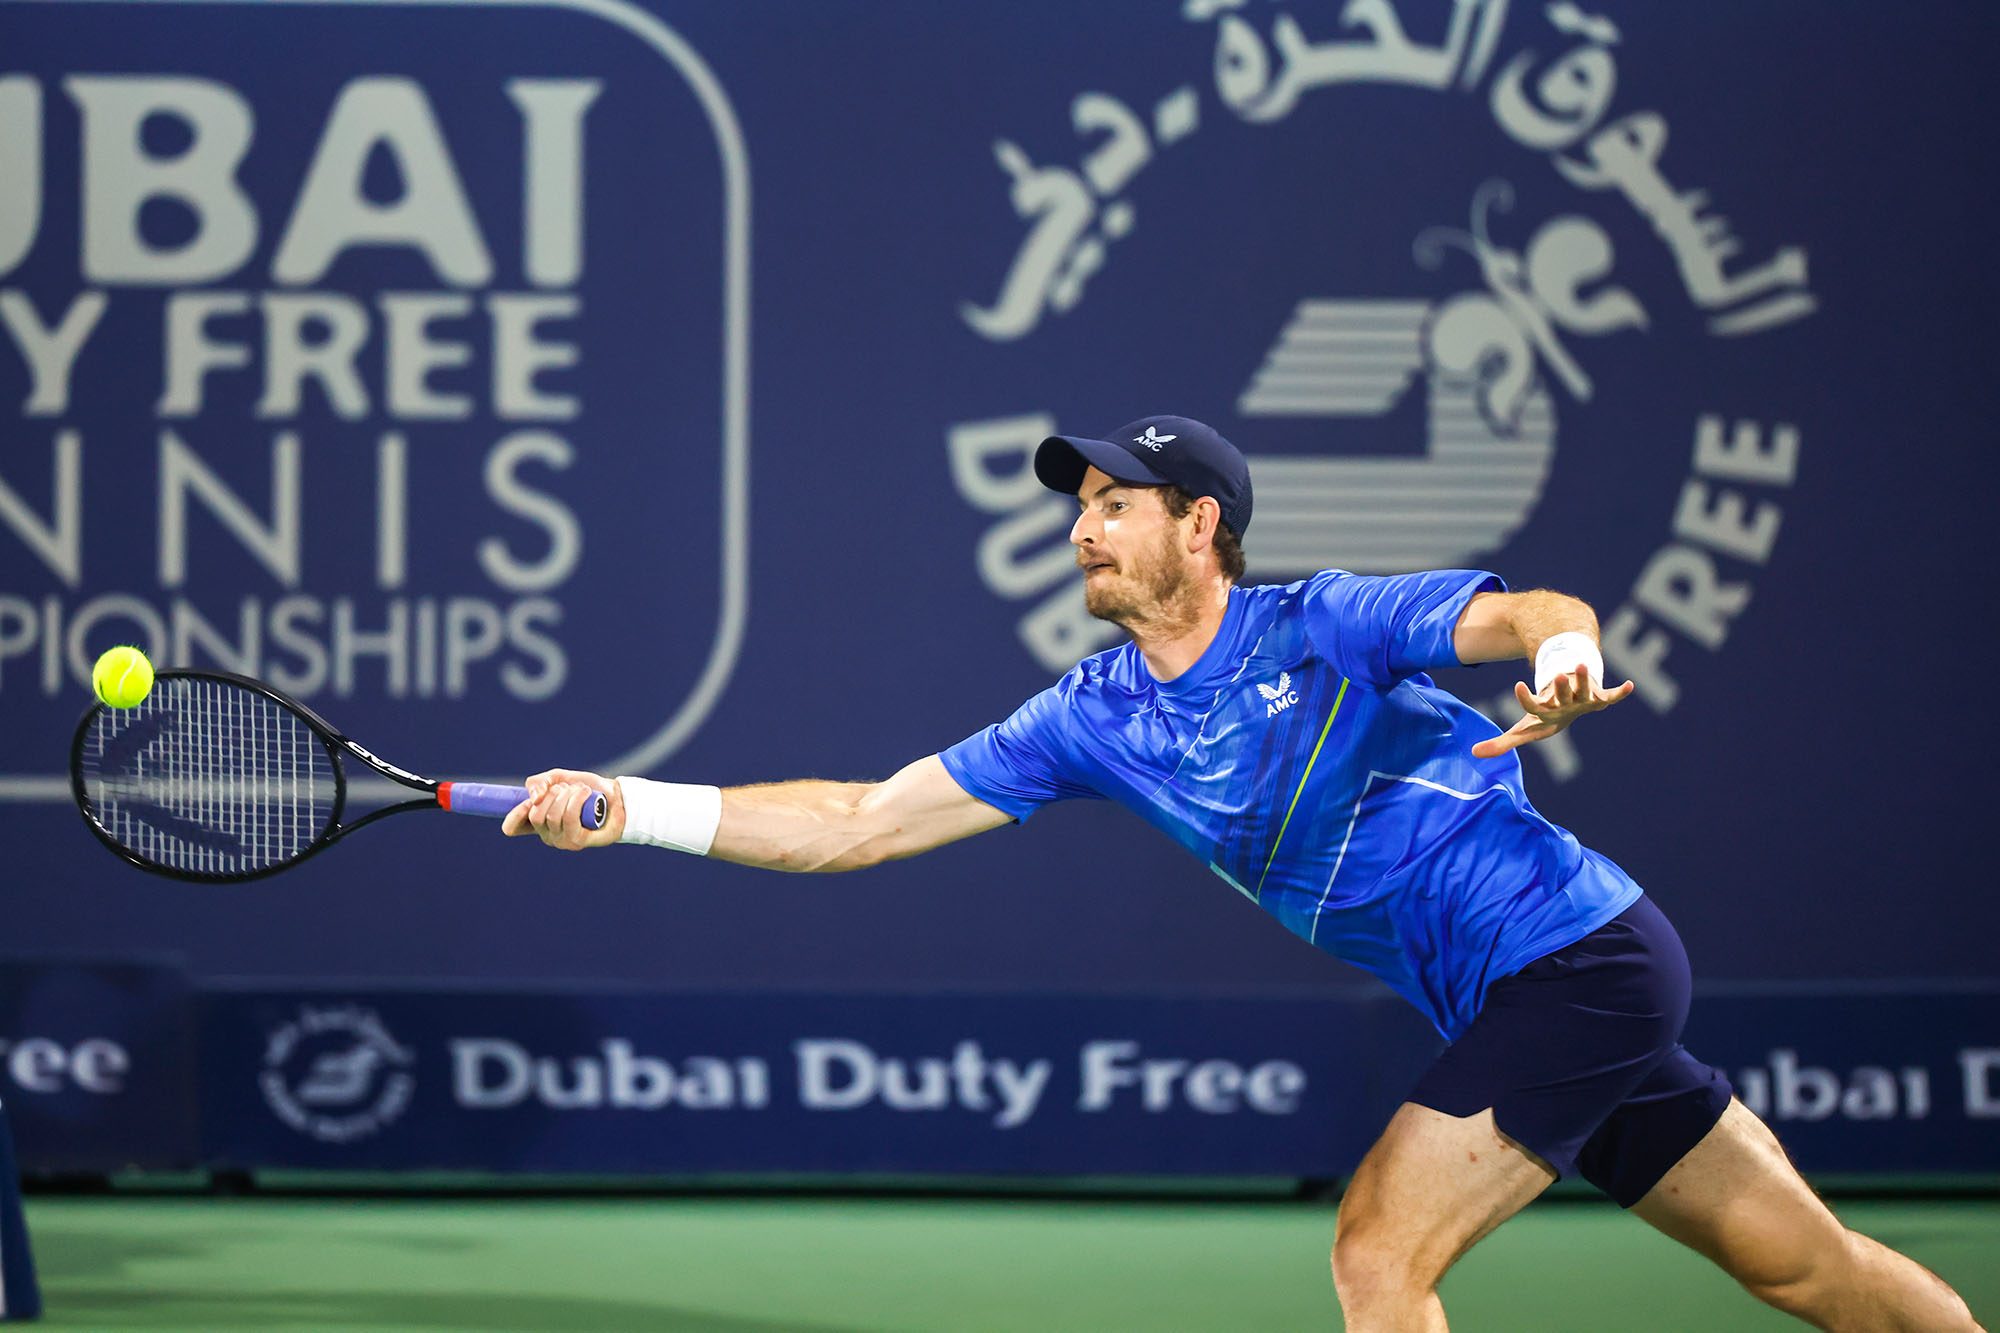 Andy Murray receives wild card for Dubai Duty Free Tennis Championships  after Australian Open 2023 recuperation - Eurosport